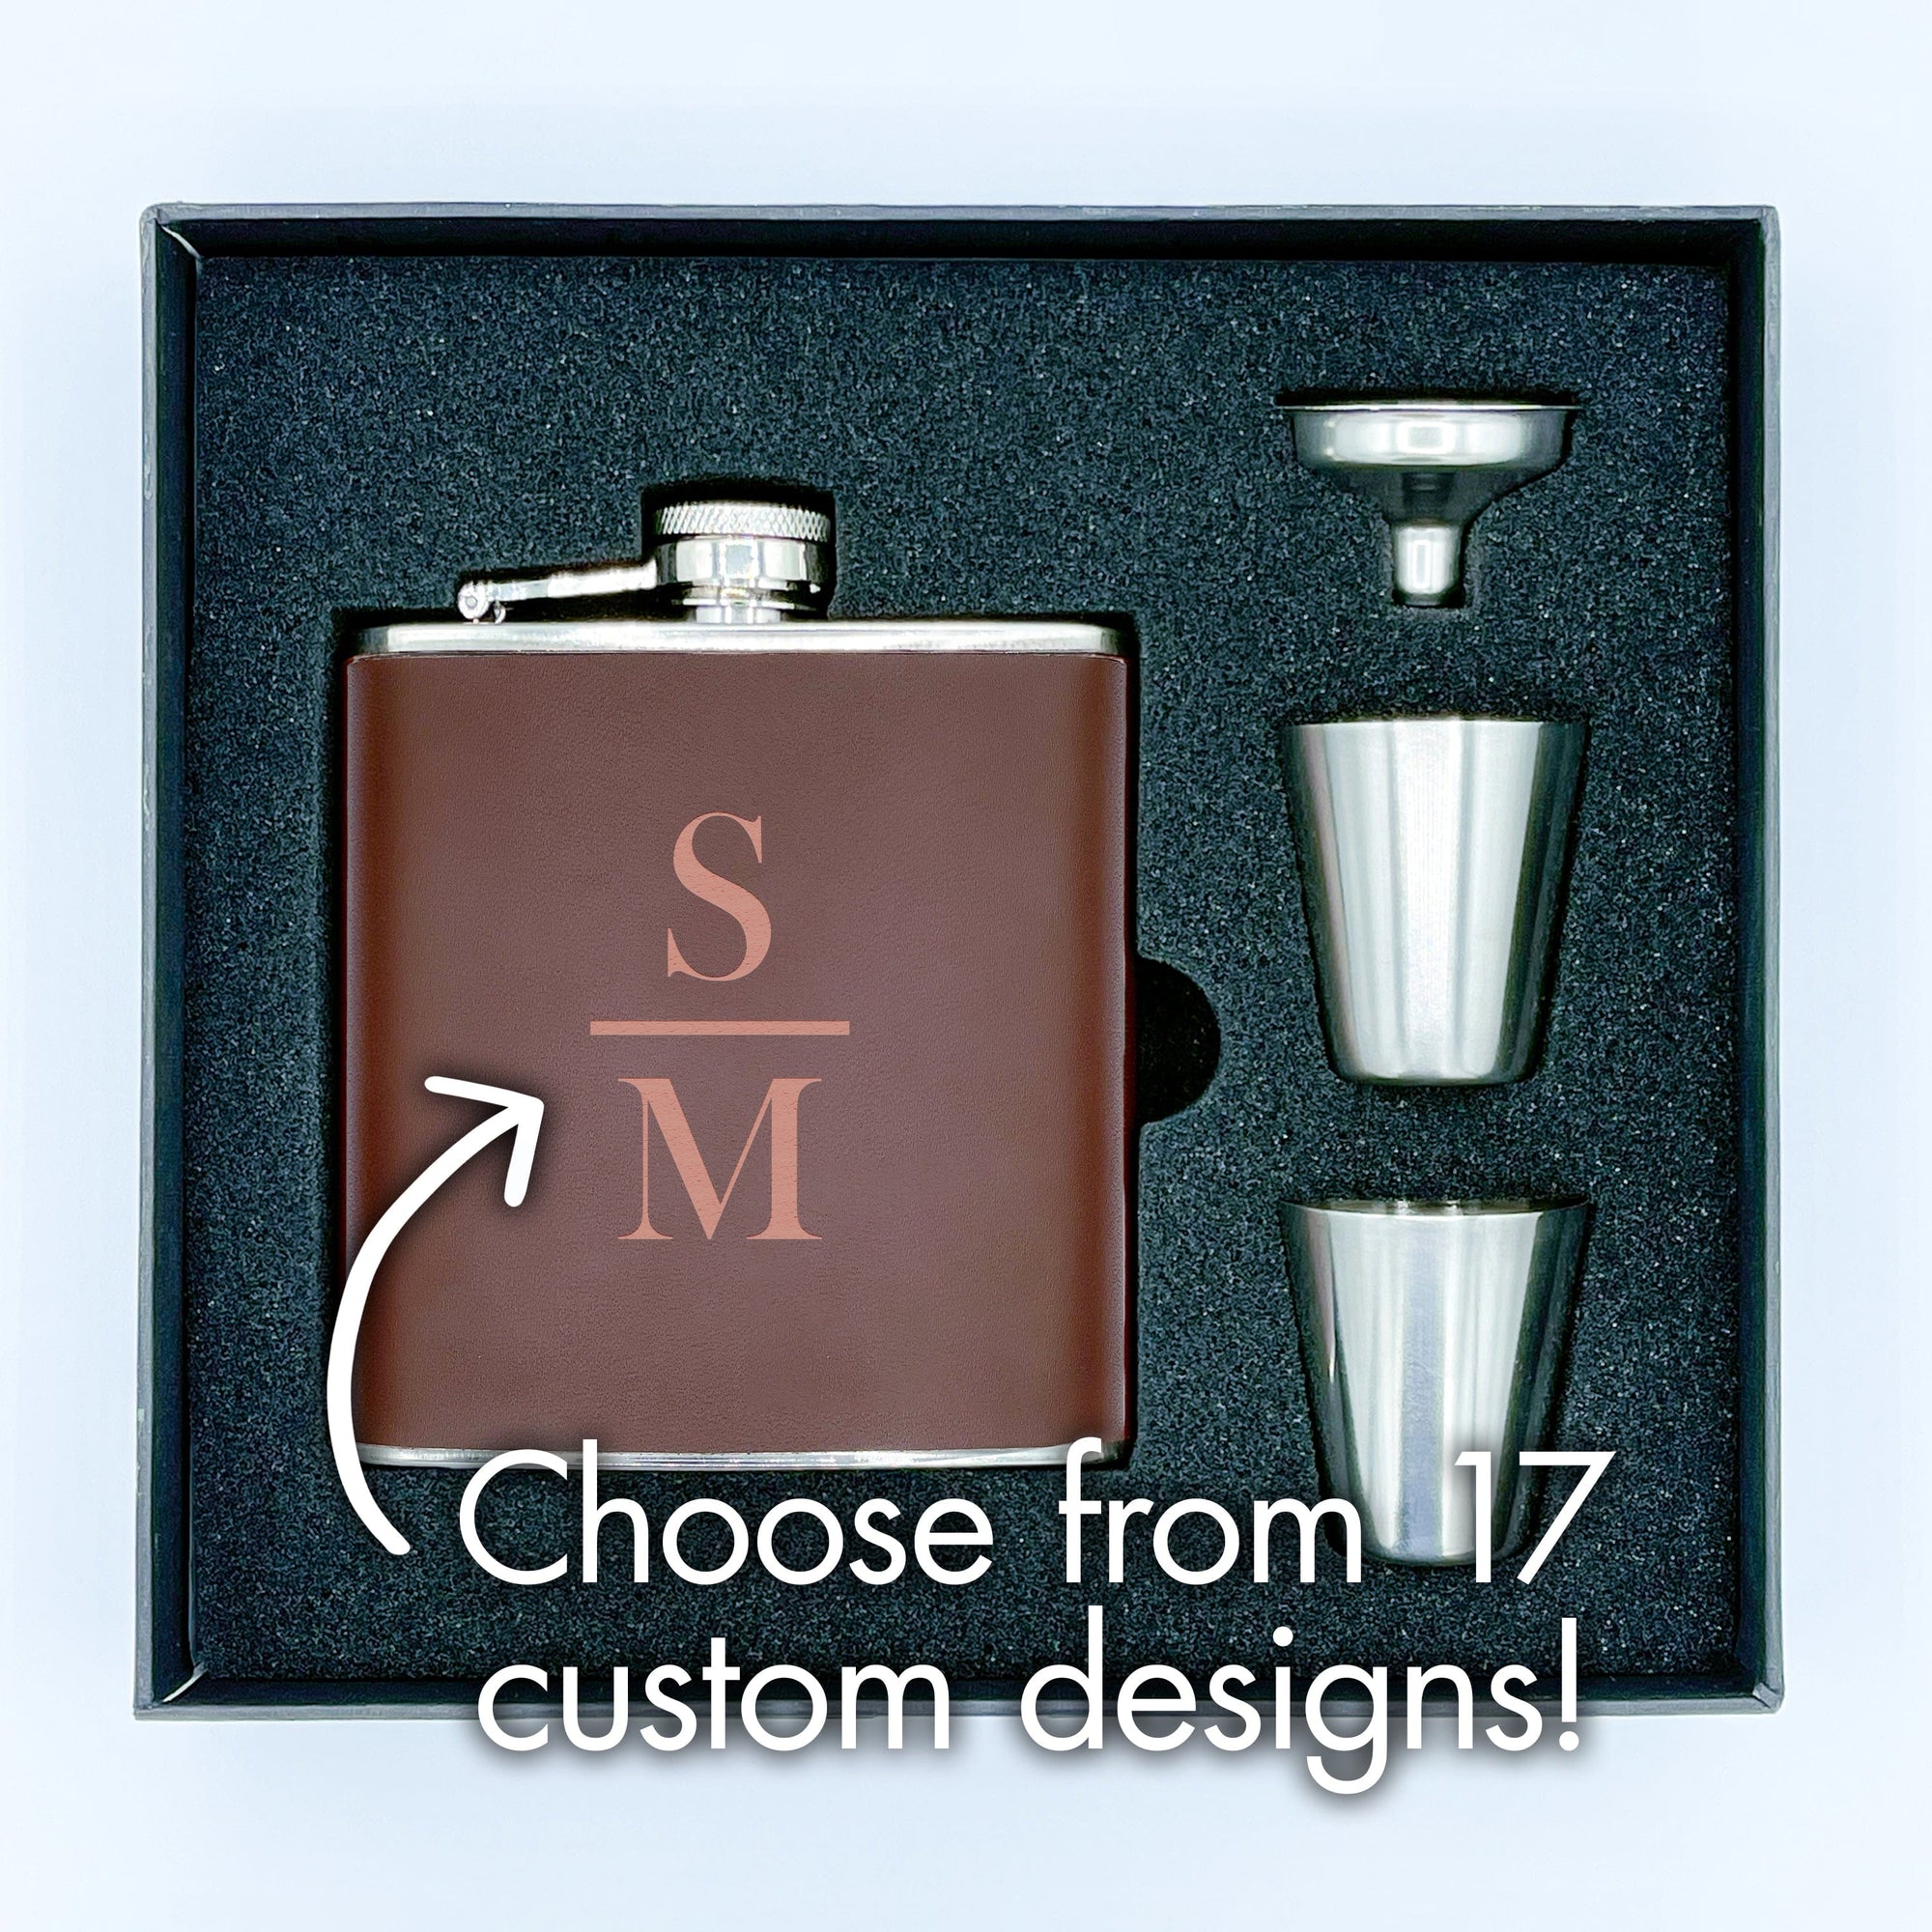 Leather flask personalized gift set from Personal prints